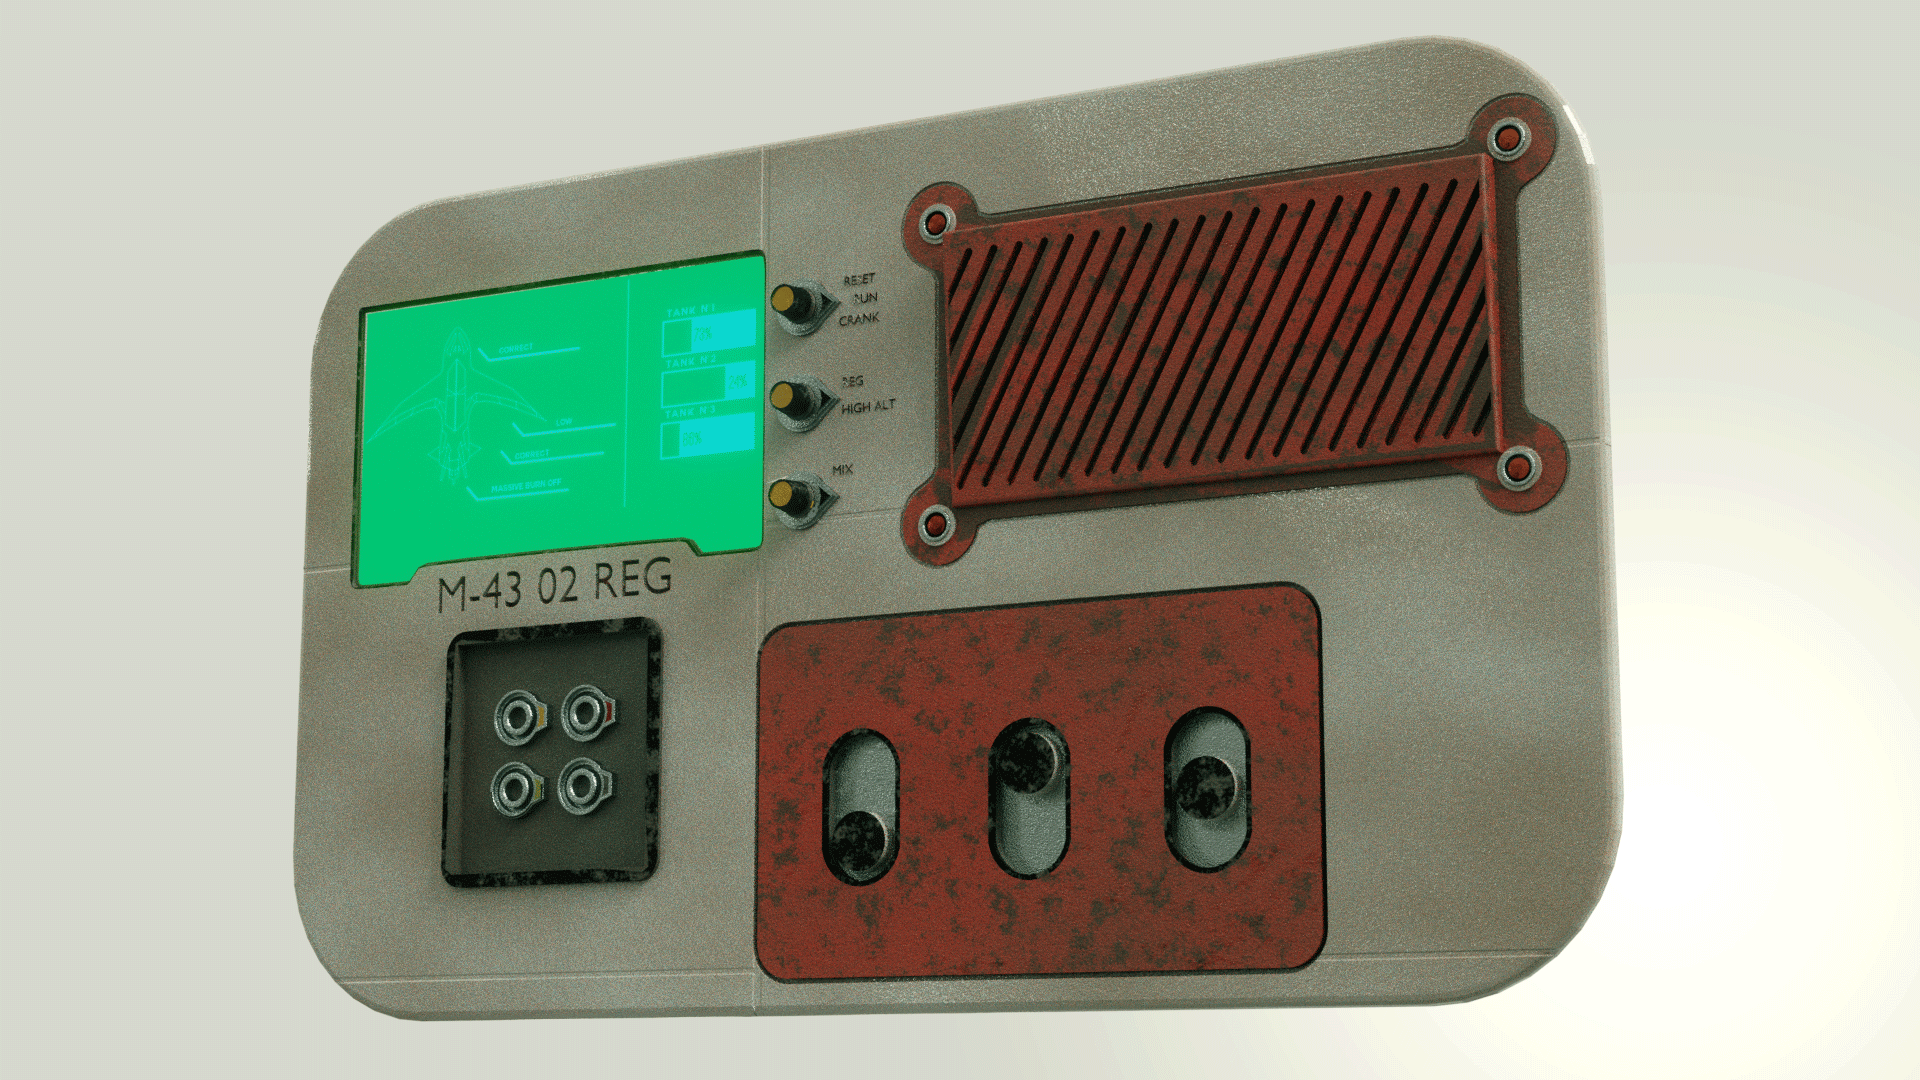 TXI-4400 Air Master Regulation Unit - A Sci Fi Console preview image 5